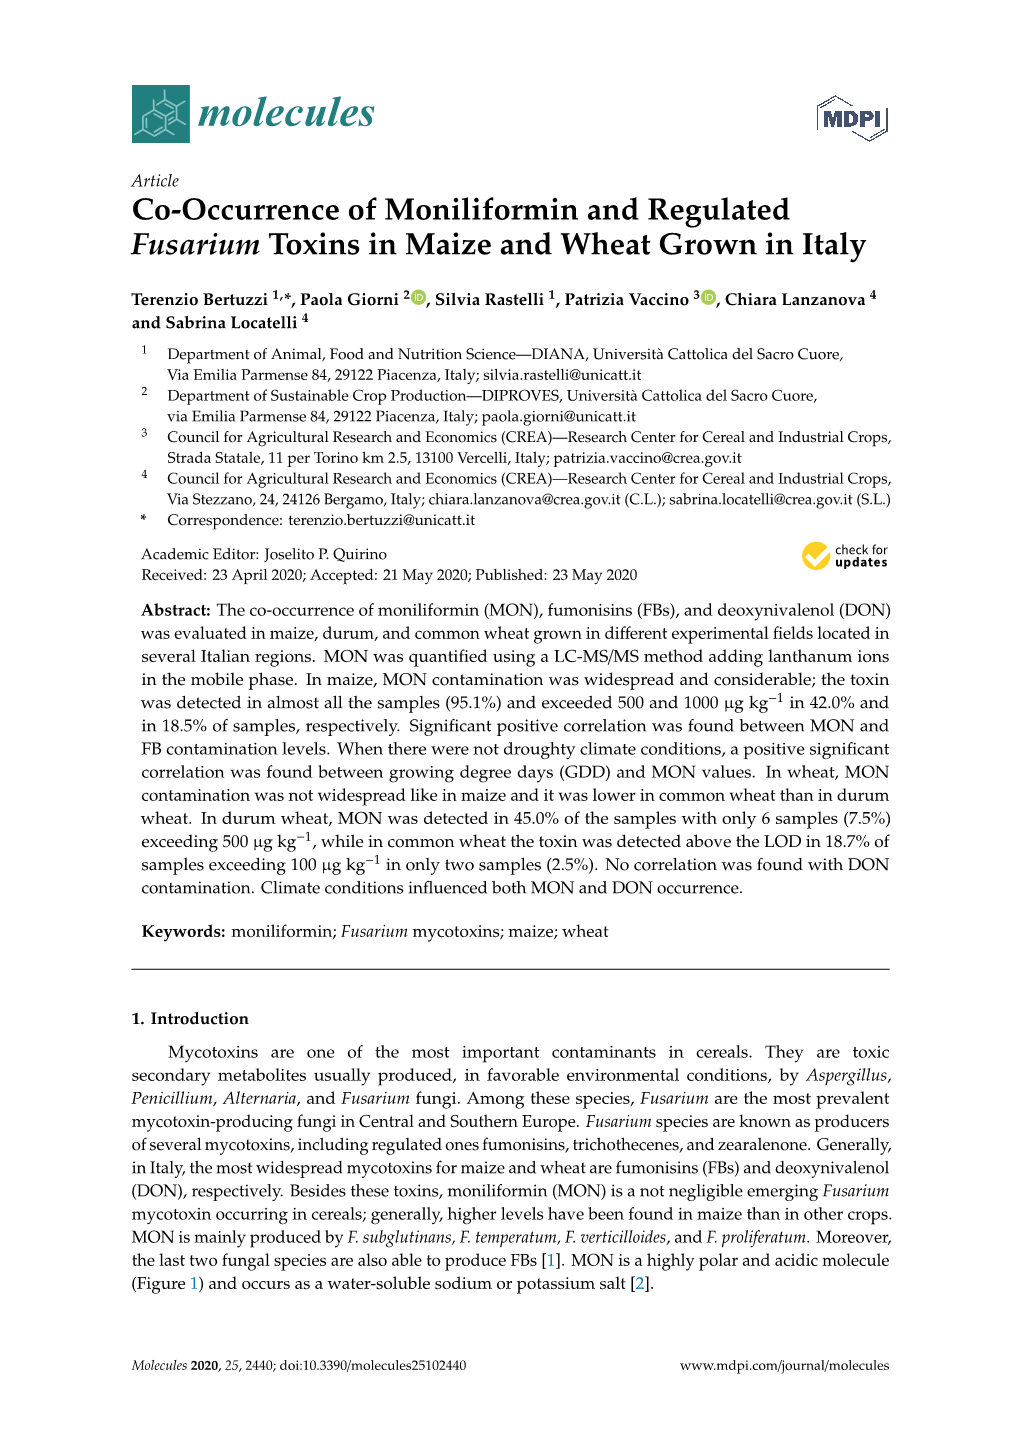 Co-Occurrence of Moniliformin and Regulated Fusarium Toxins in Maize and Wheat Grown in Italy